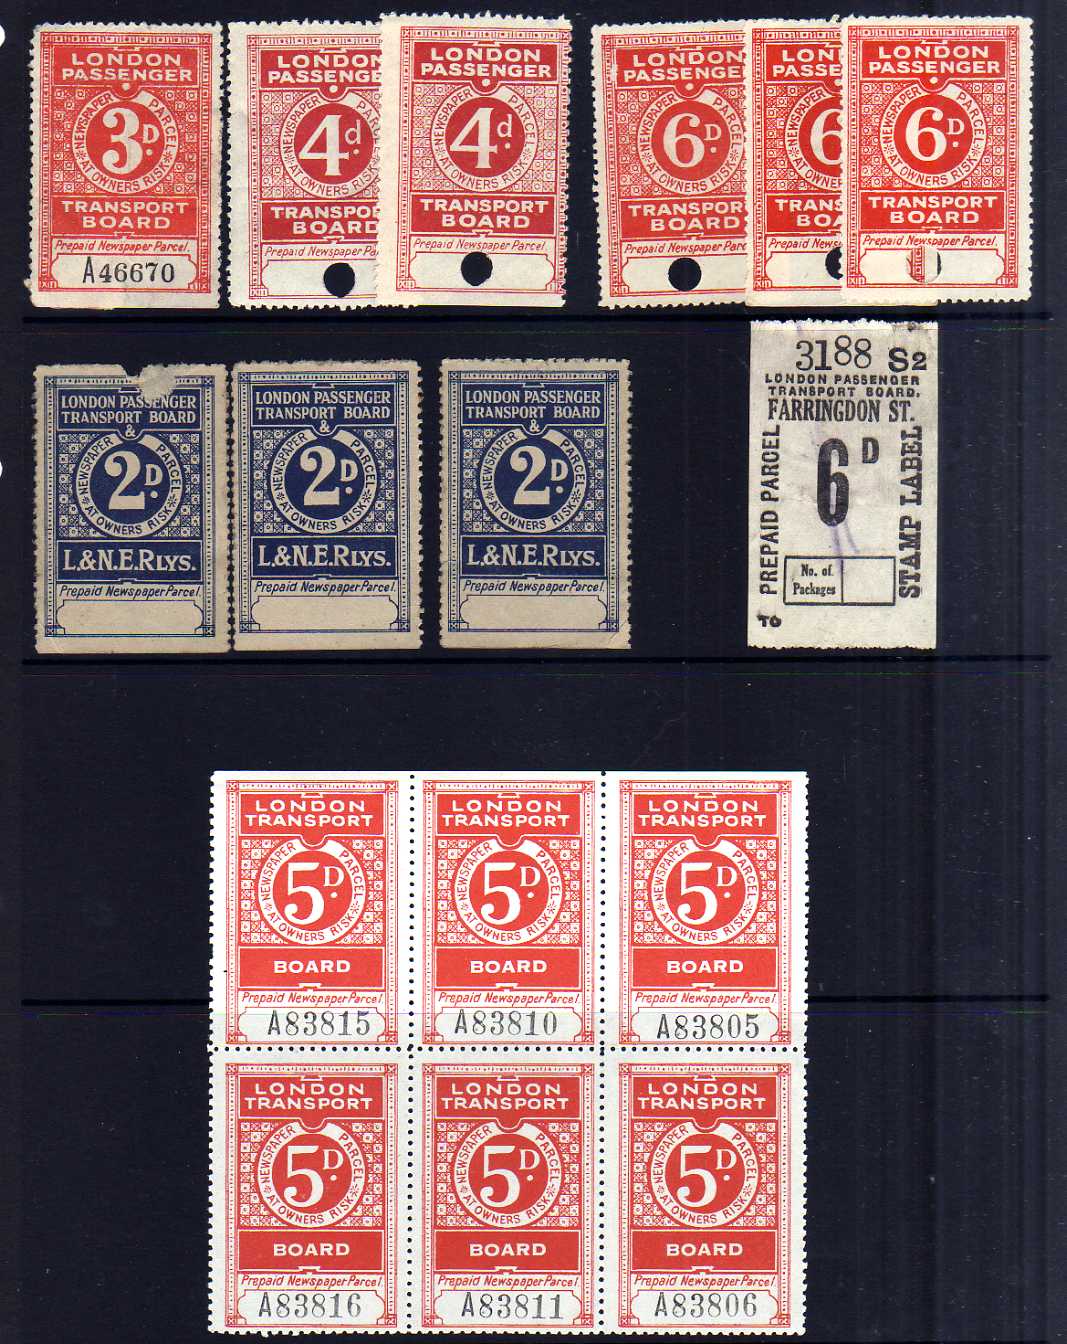 LONDON PASSENGER TRANSPORT BOARD: MINT OR UNUSED SELECTION, EXECUTIVE WITH BLOCKS OF FOUR, - Image 4 of 4